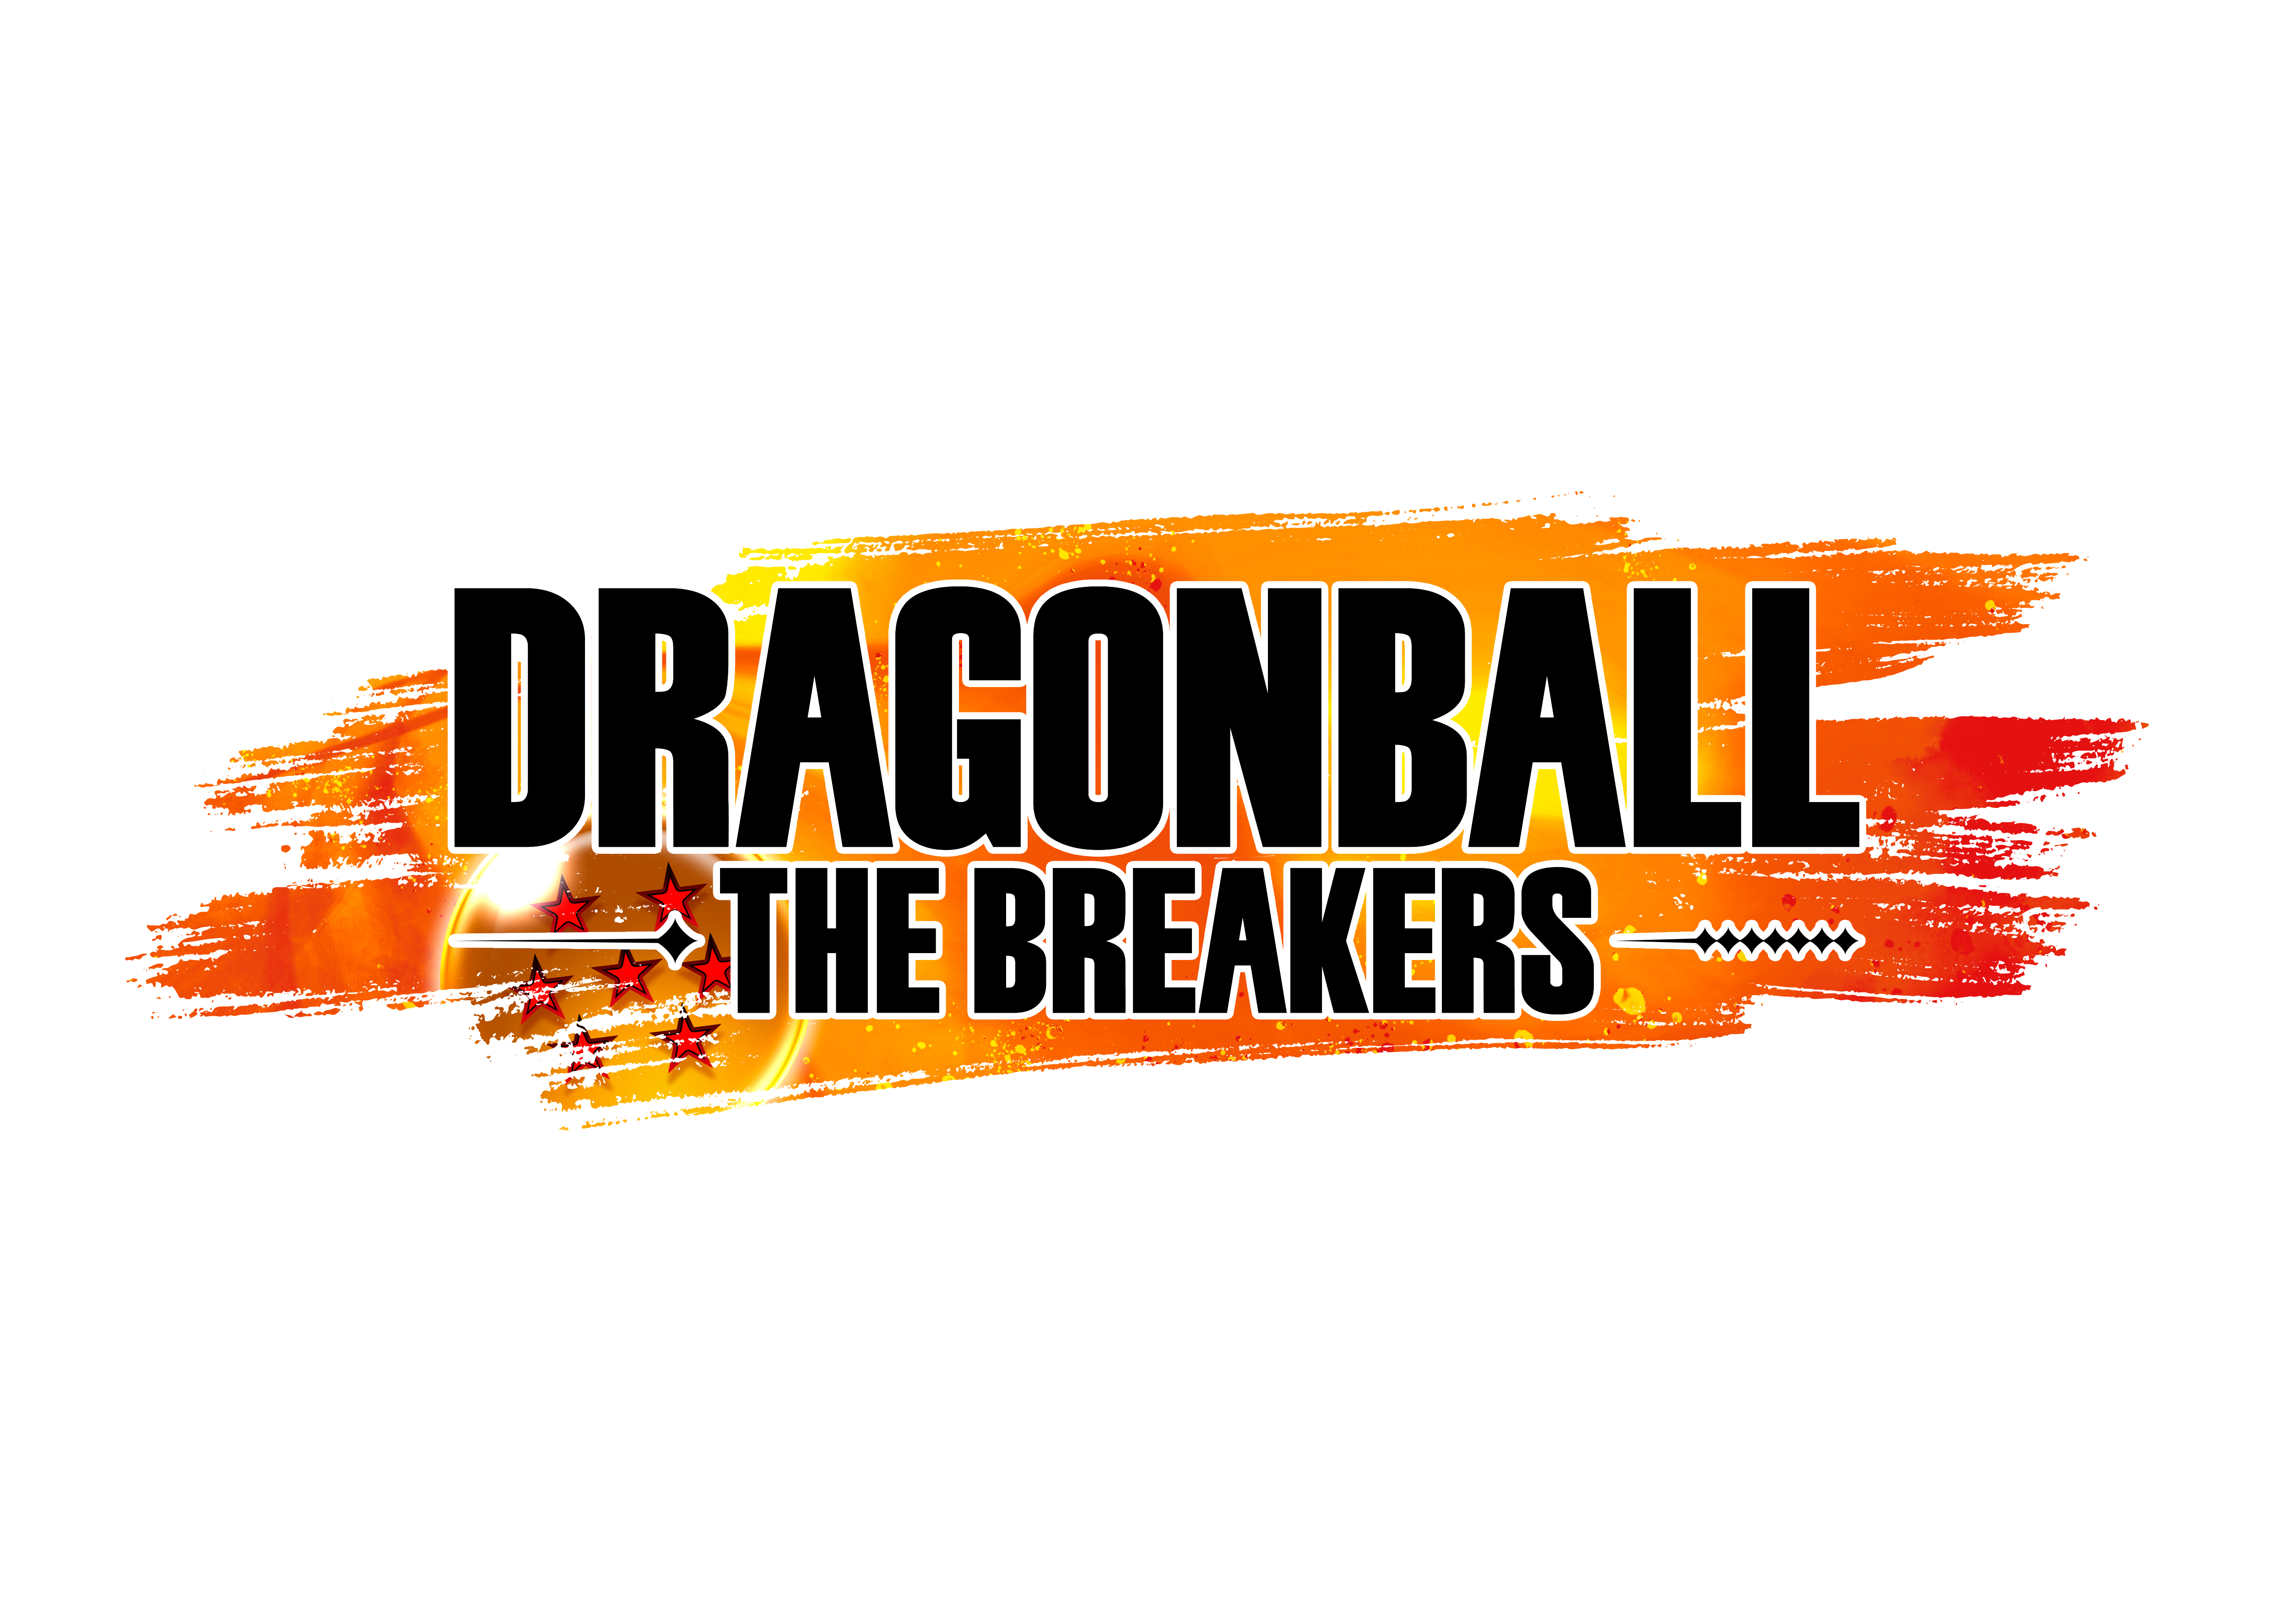 Dragon Ball: The Breakers is a new survival horror game based in